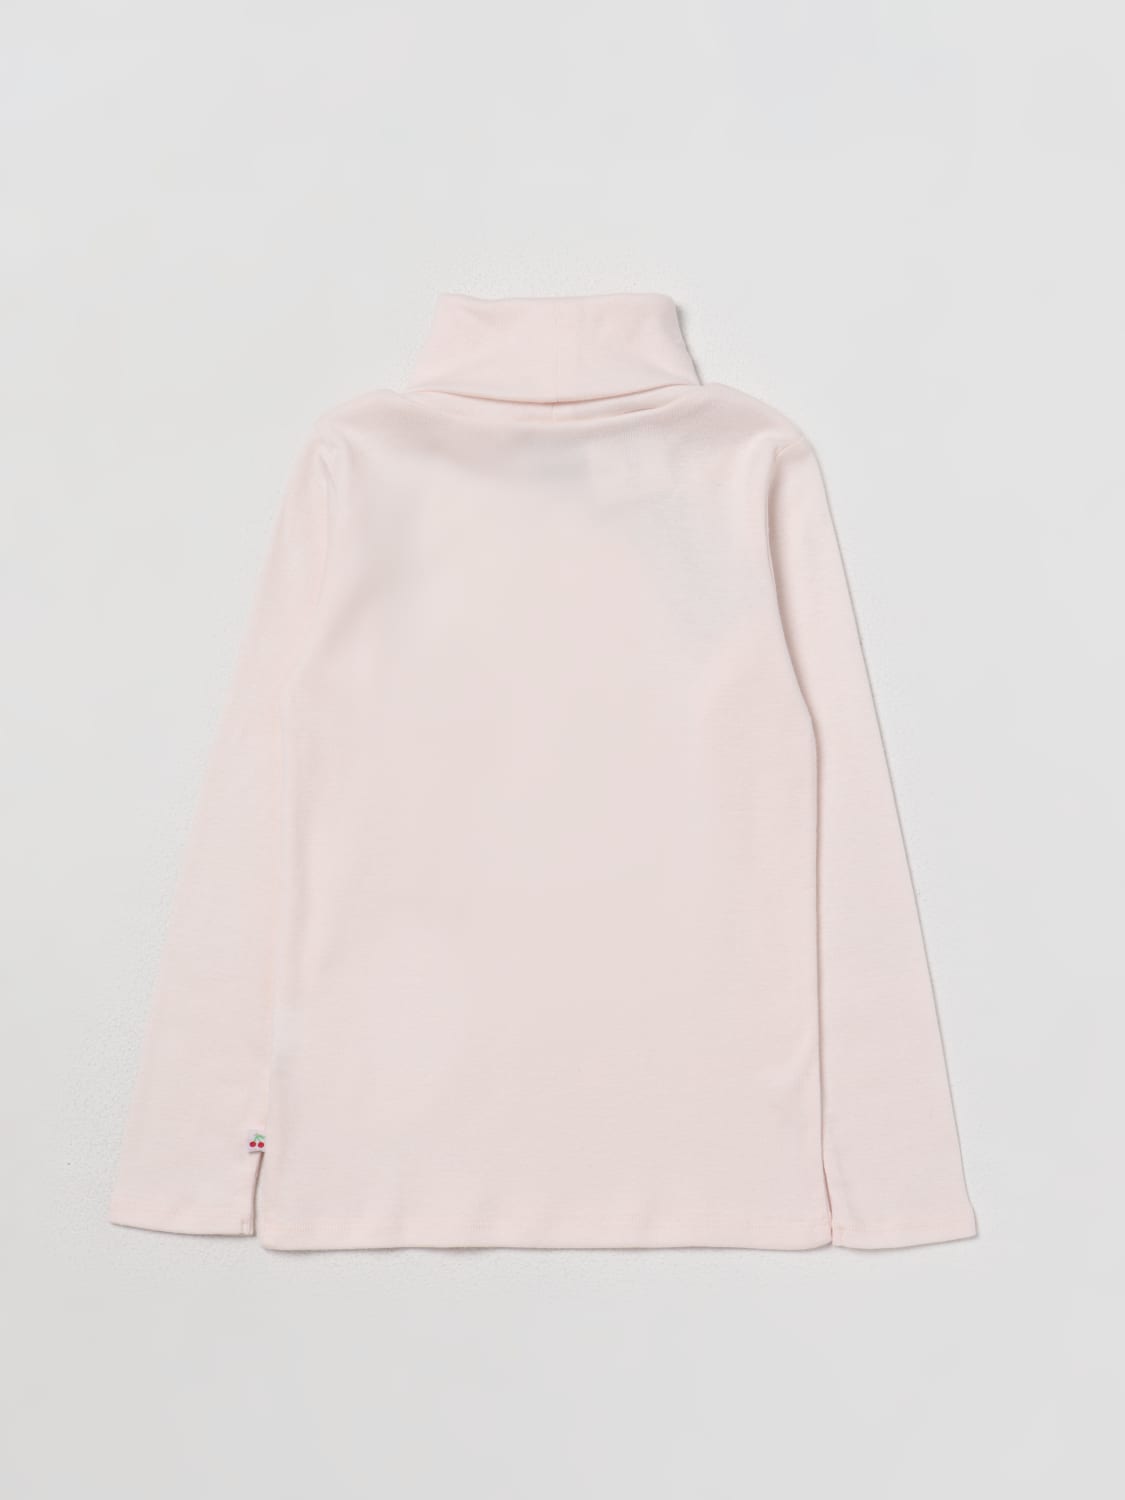 BONPOINT: Delie sweater in cotton - Pink | Bonpoint sweater ...